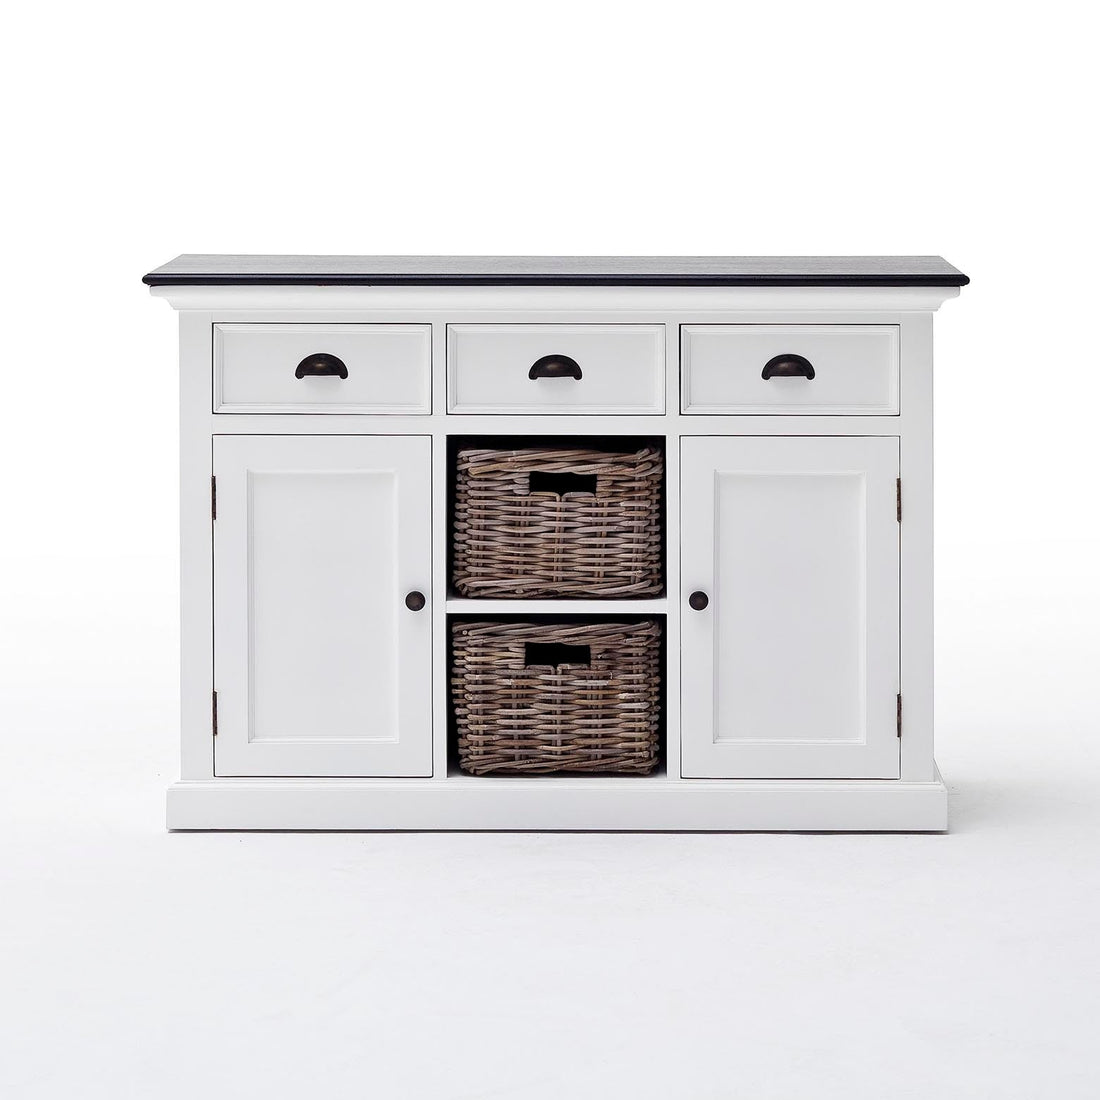 Halifax Contrast sideboard with 2 wicker drawers